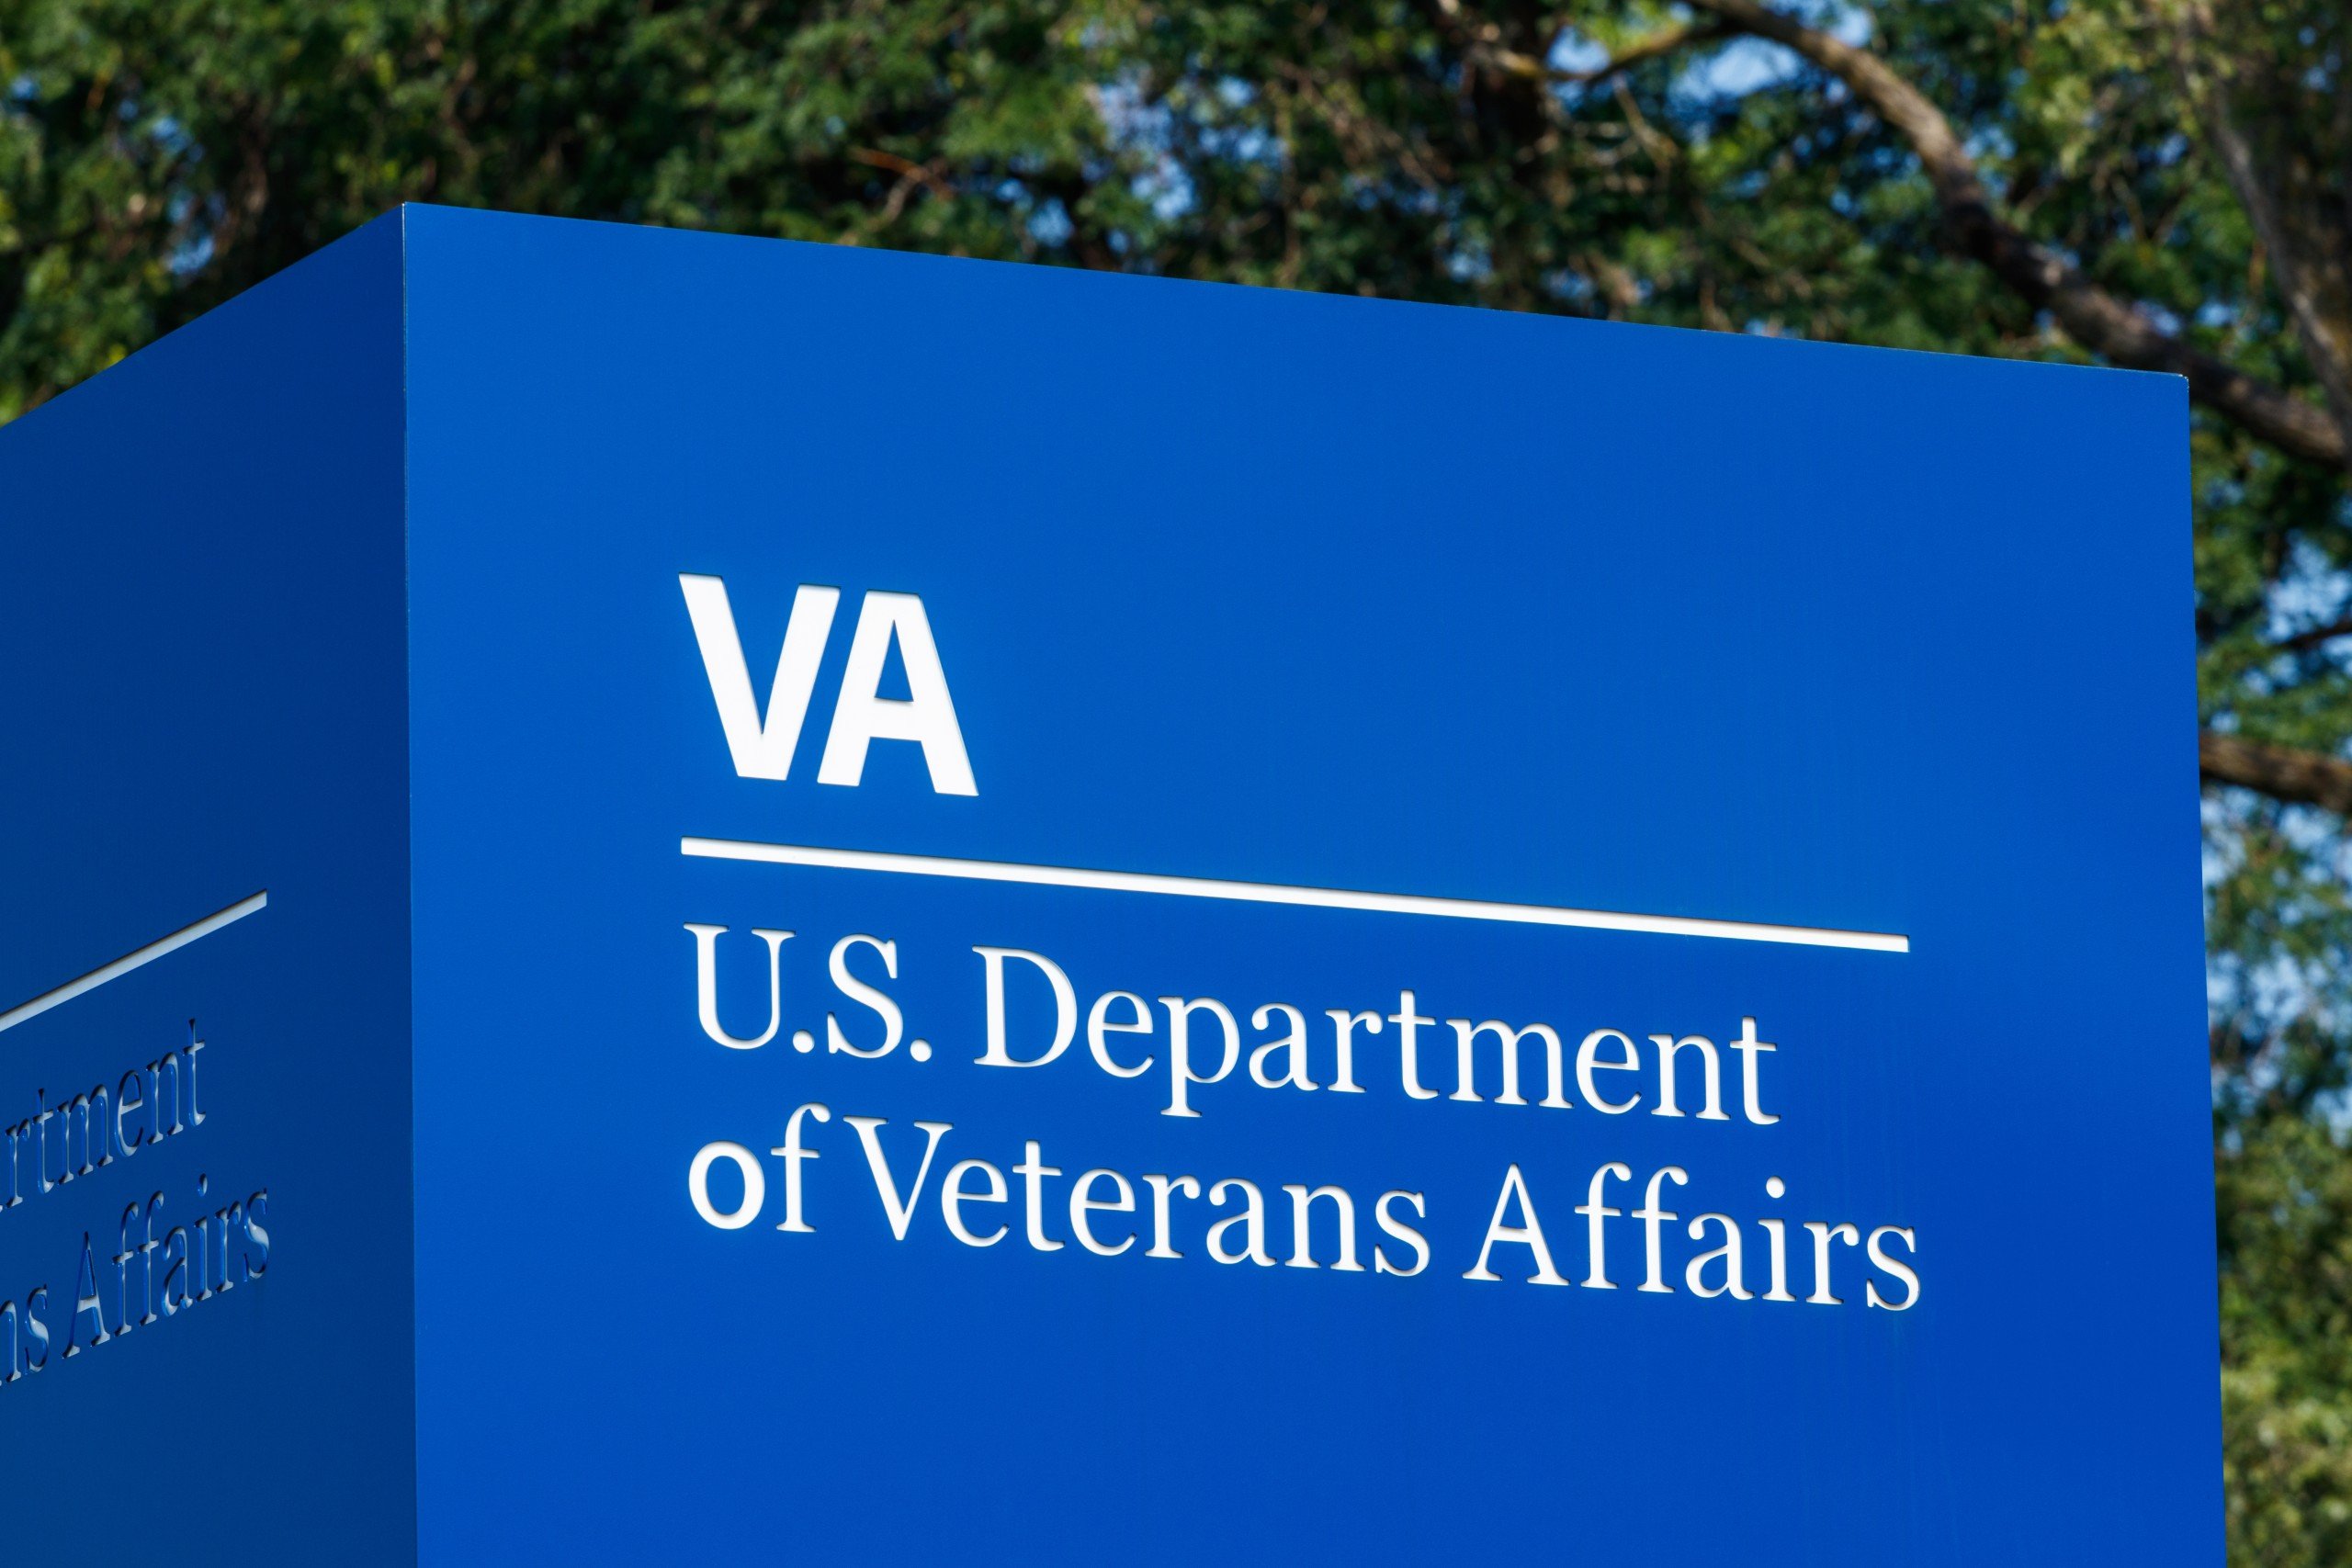 All WWII Veterans are now eligible for no-cost VA health care and nursing home services